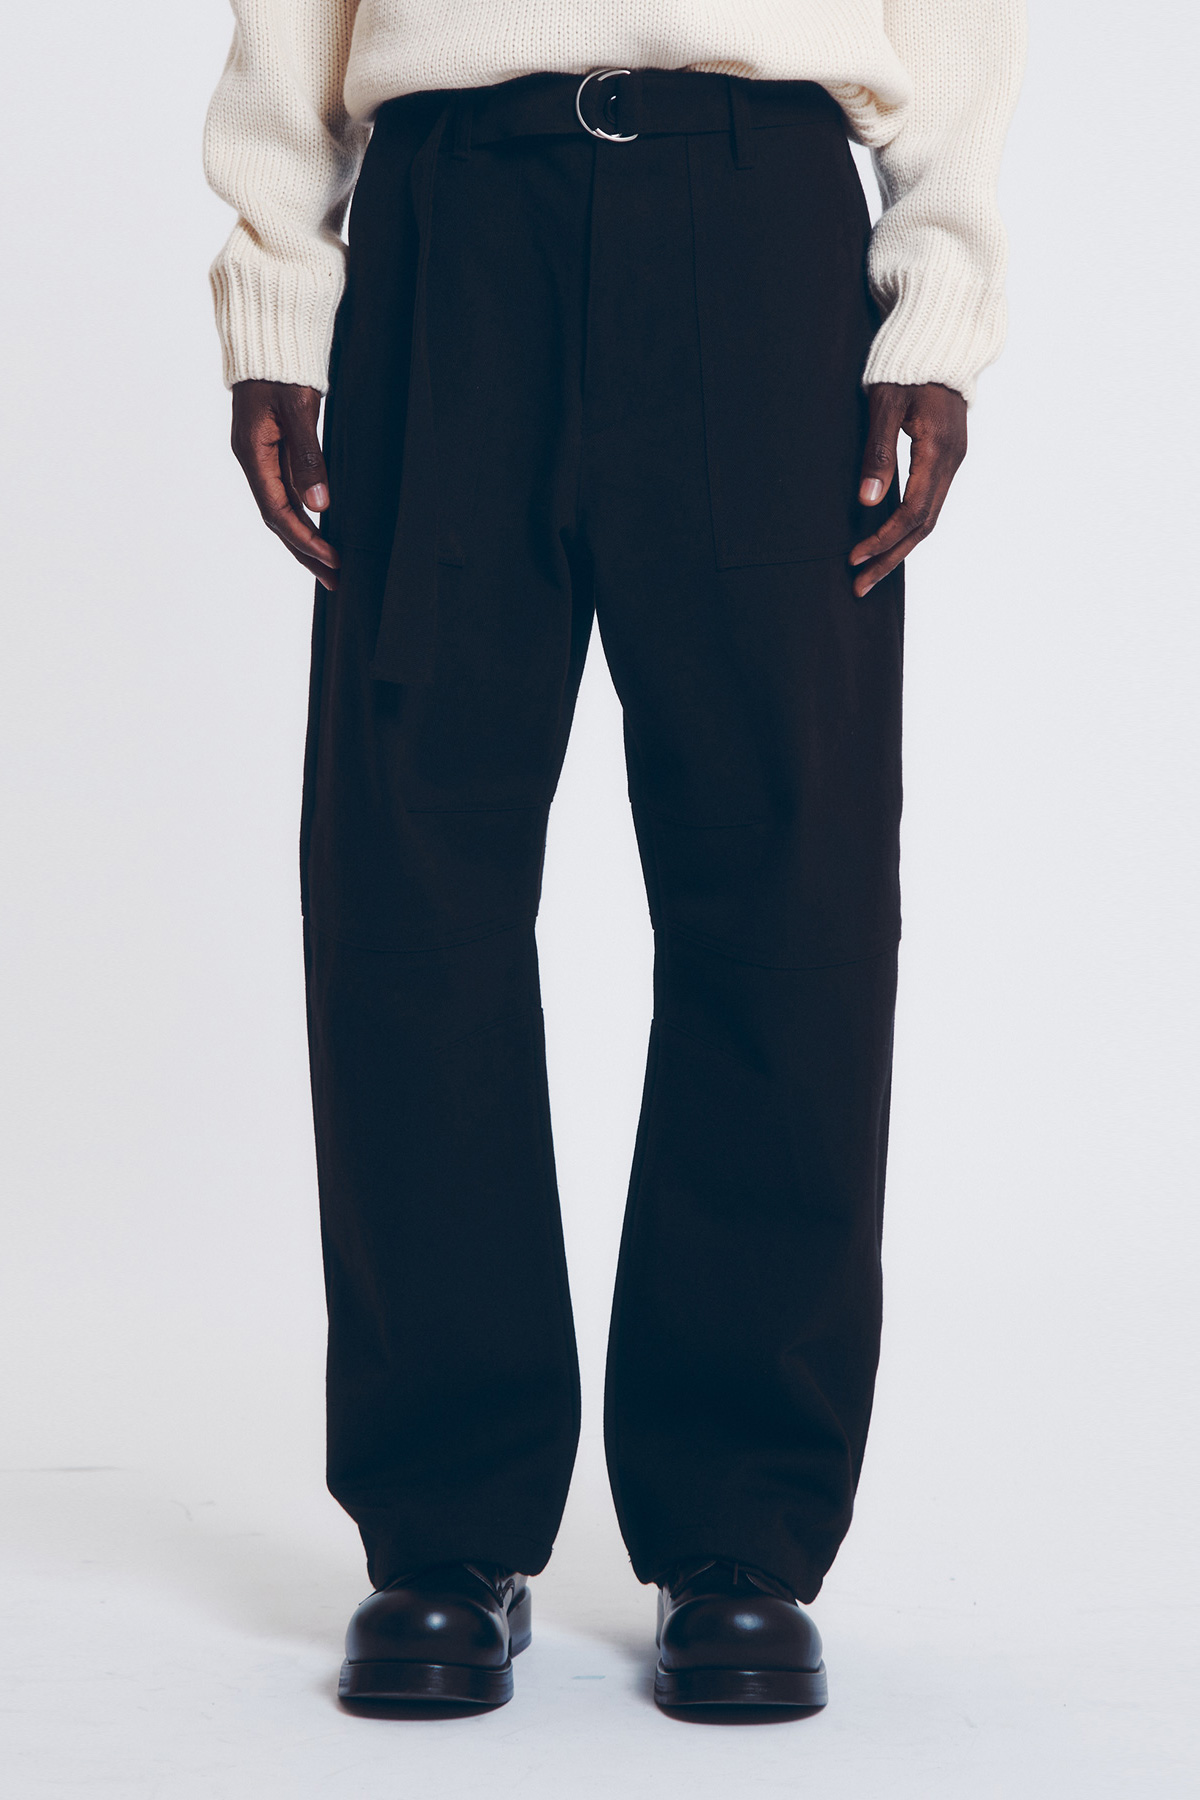 COTTON TWILL BELTED WORK PANTS (BLACK)